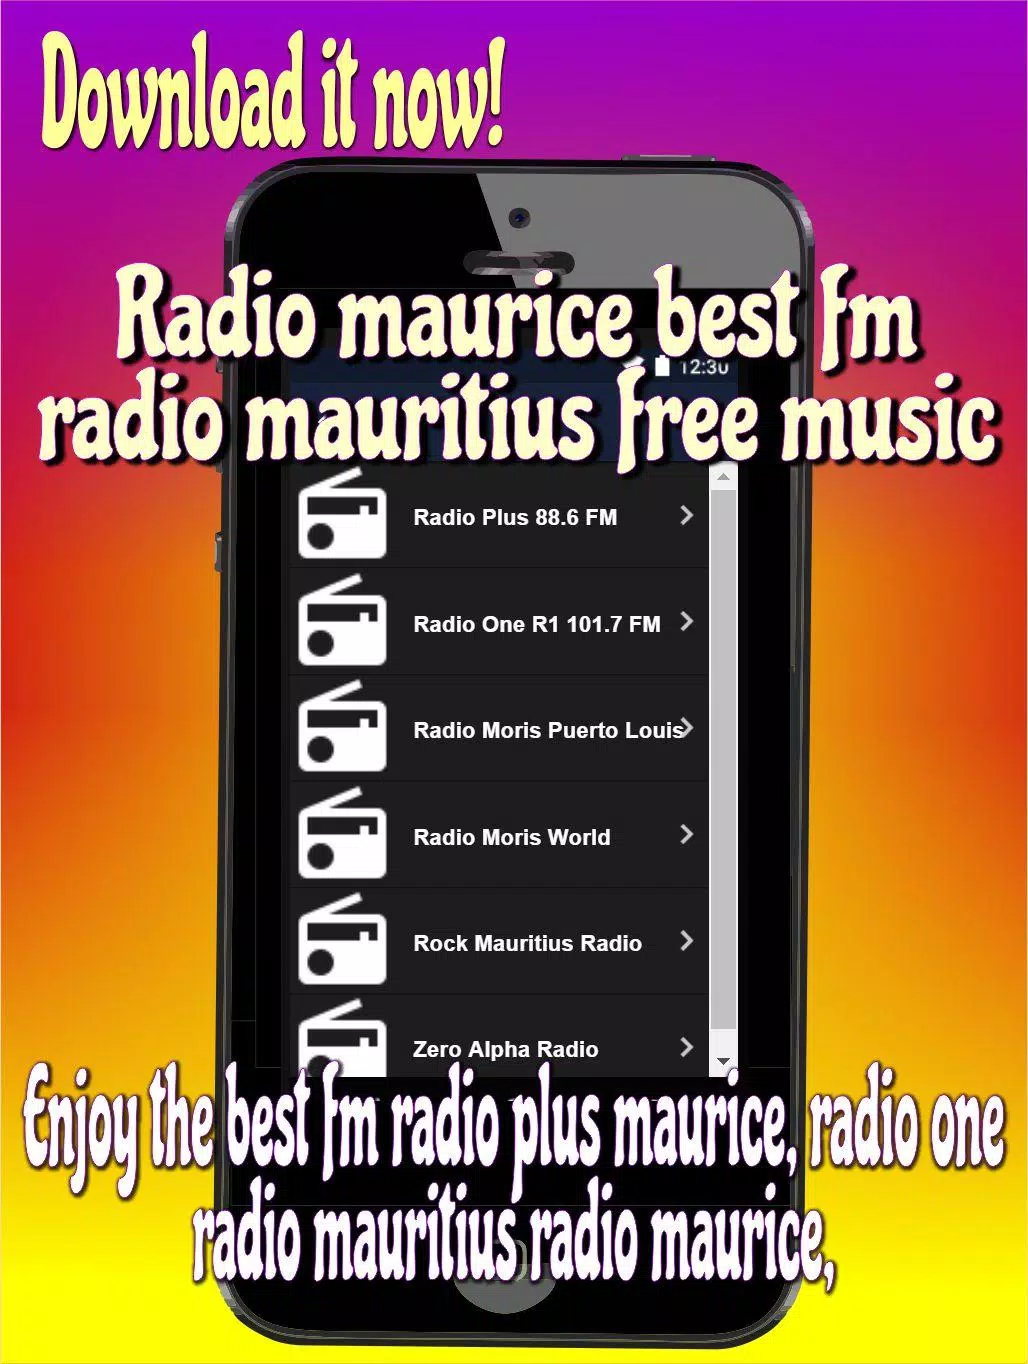 Radio maurice best fm radio mauritius free music APK pour Android  Télécharger